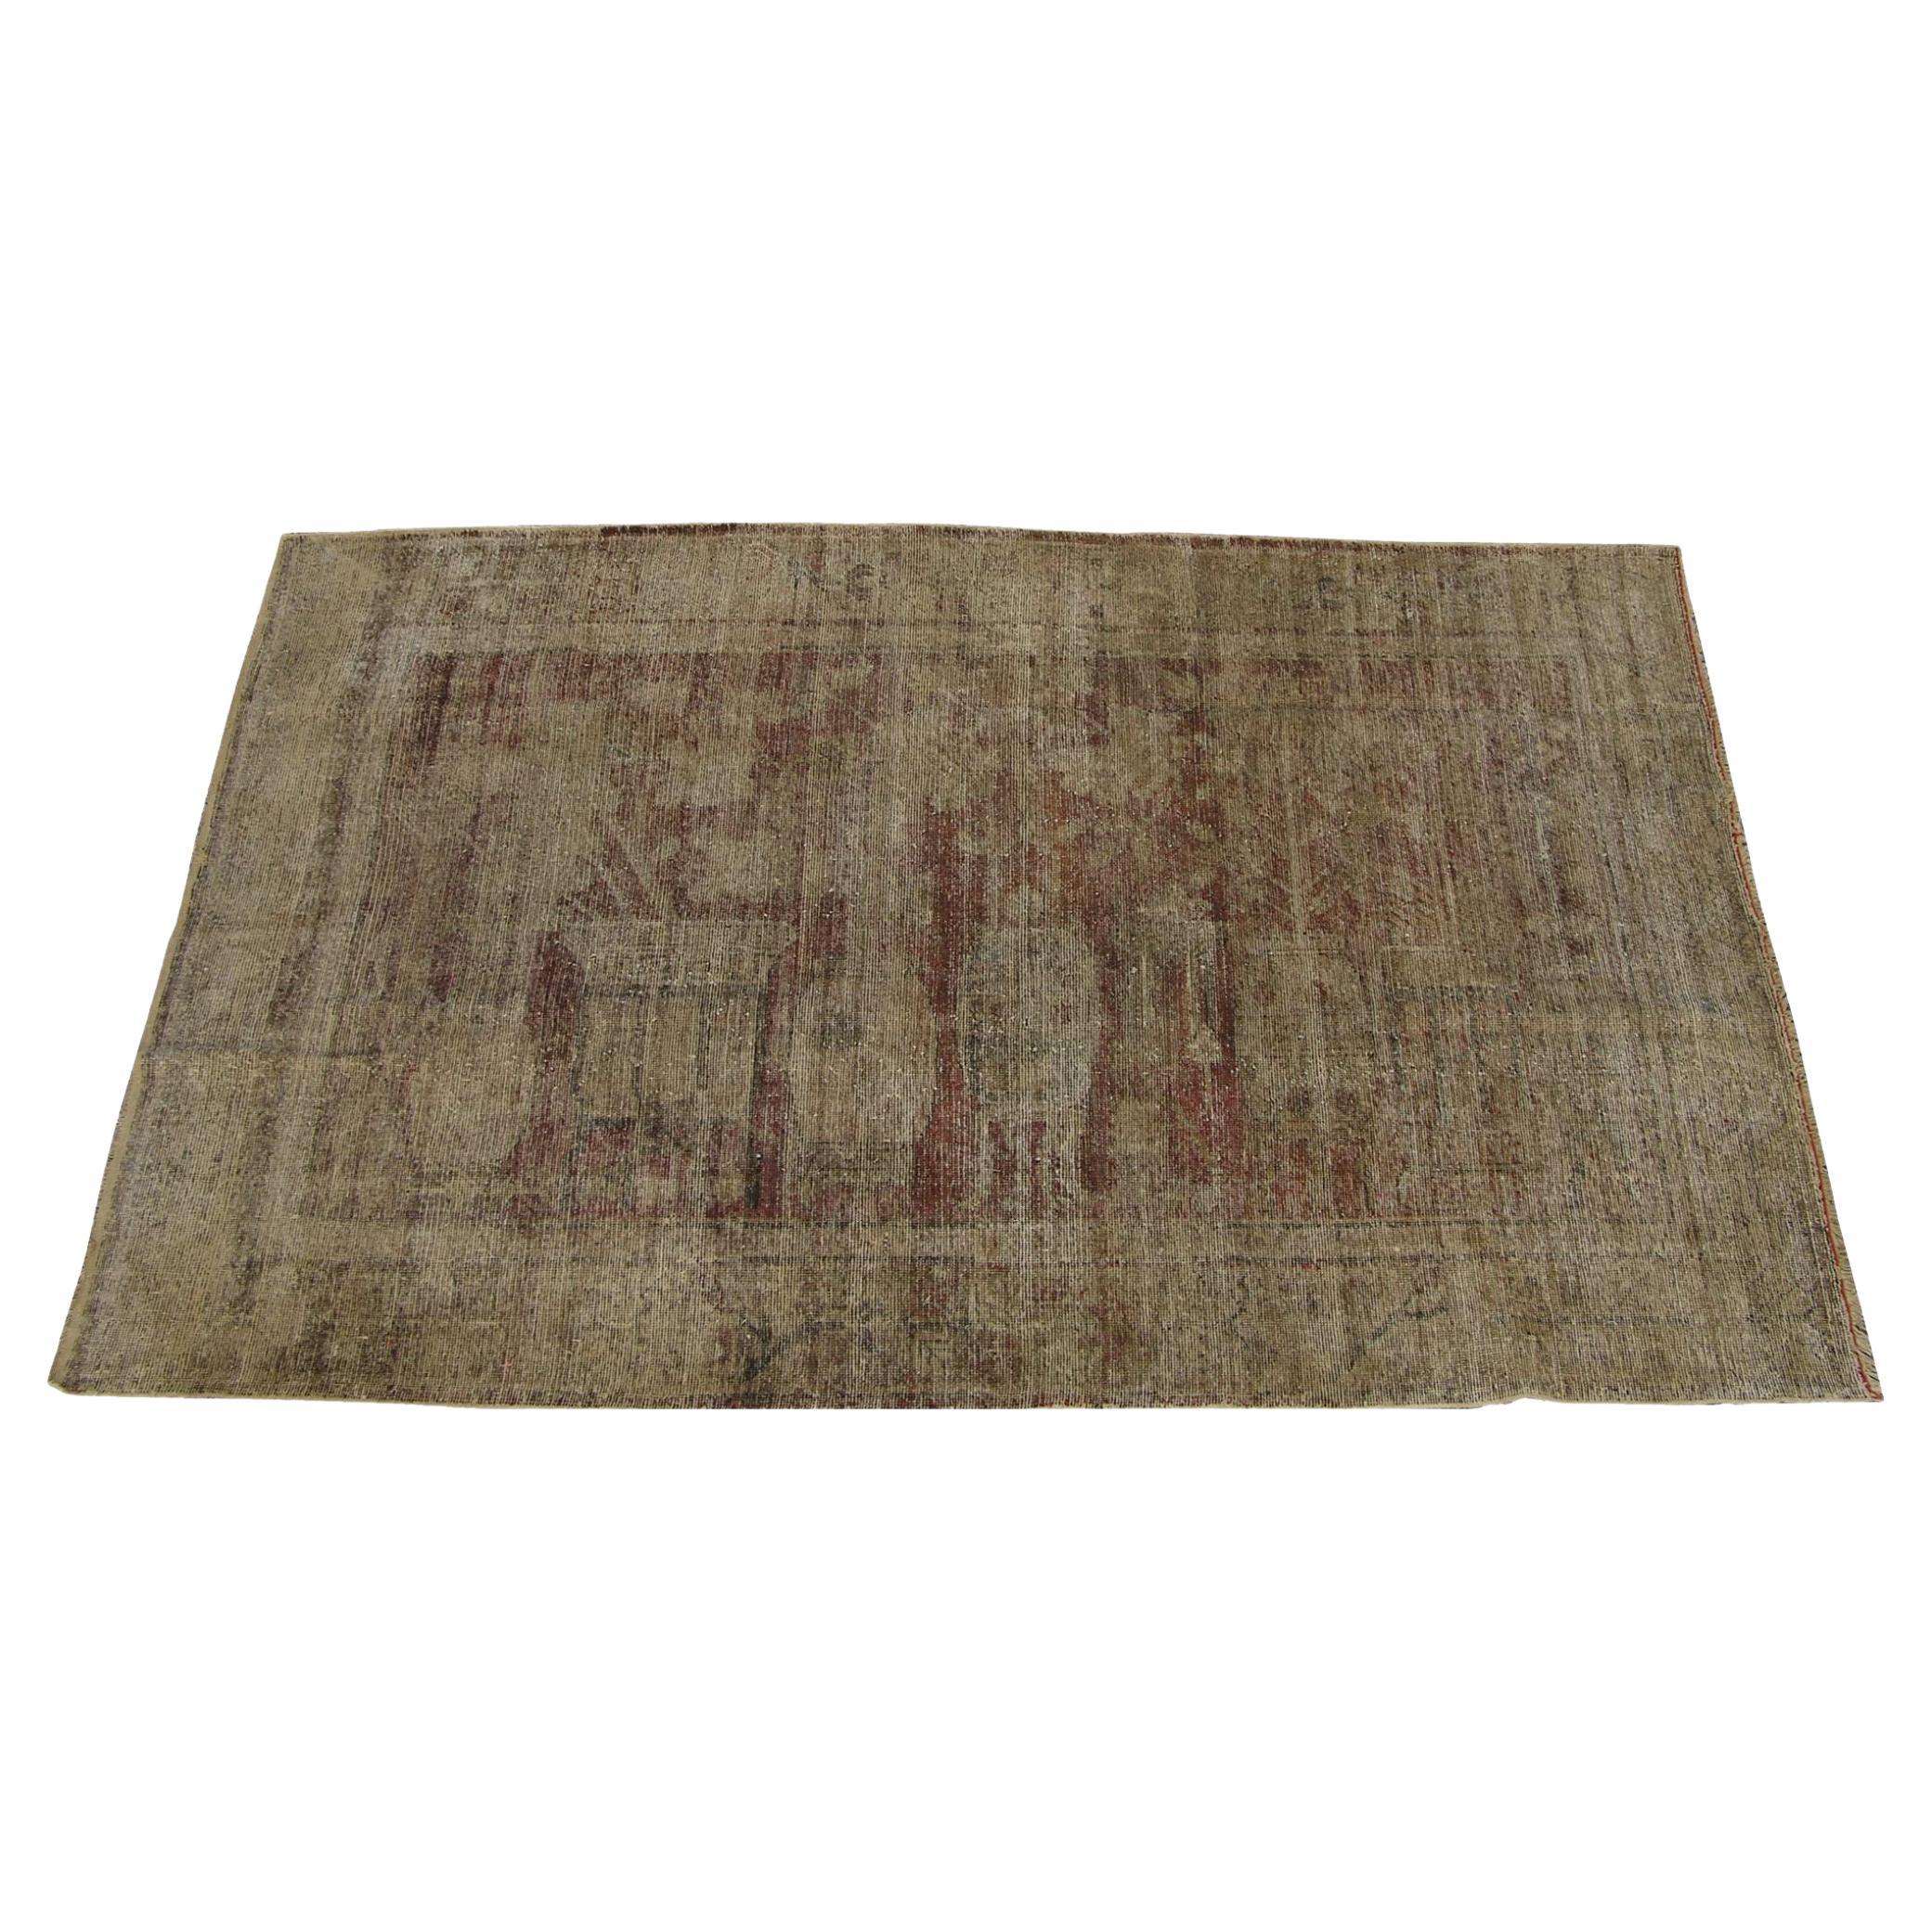 Late 19th Century Vintage Muted Samarkand Rug For Sale